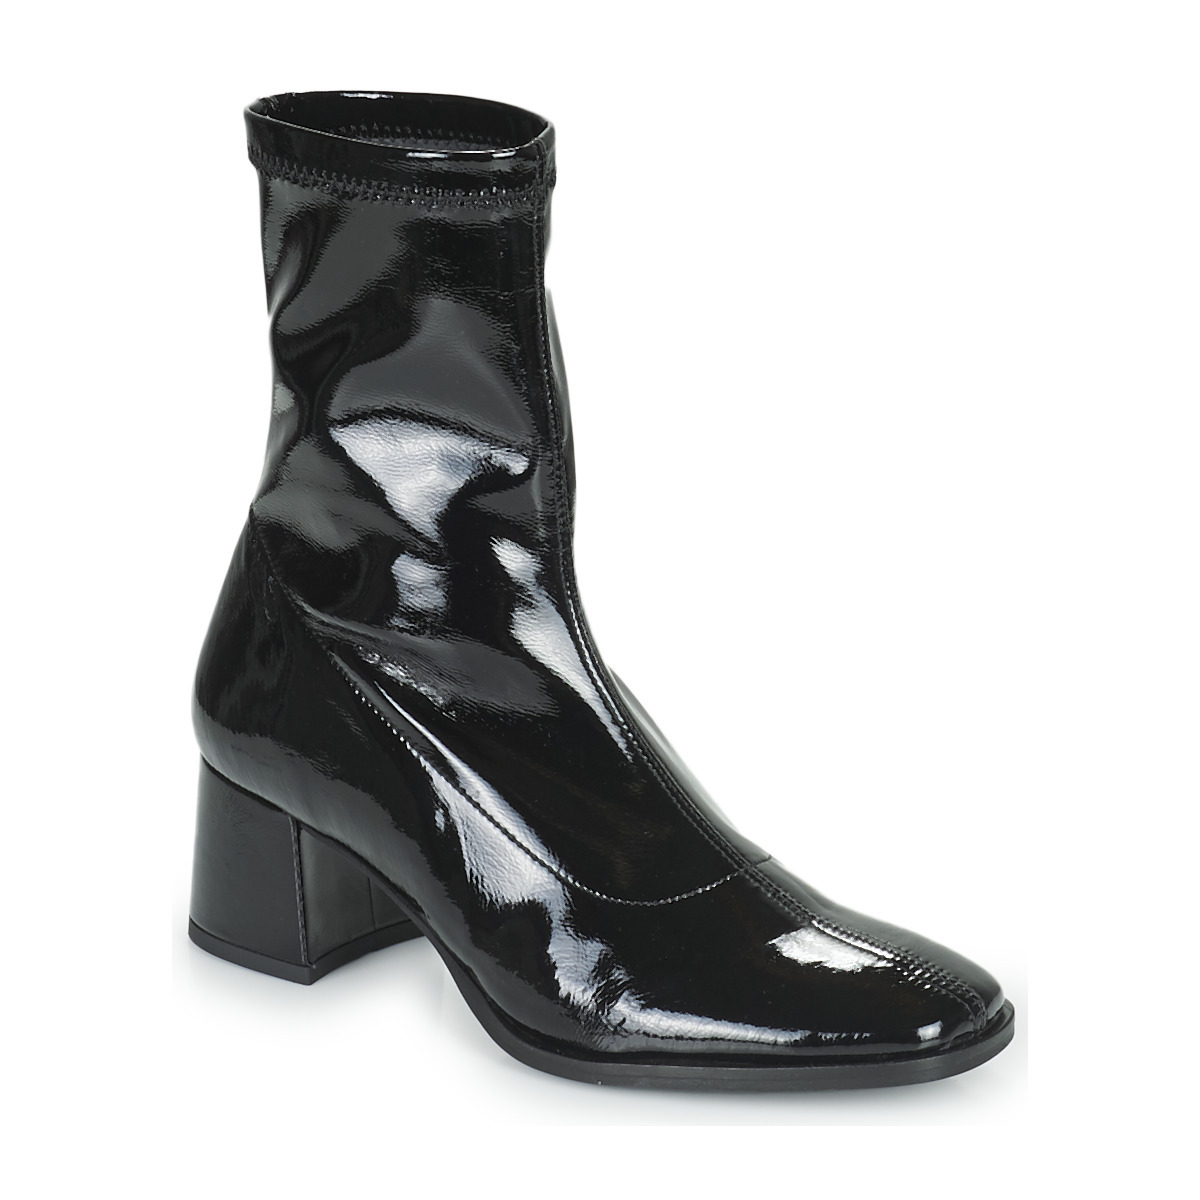 Myma Women's Black Ankle Boots at Spartoo GOOFASH